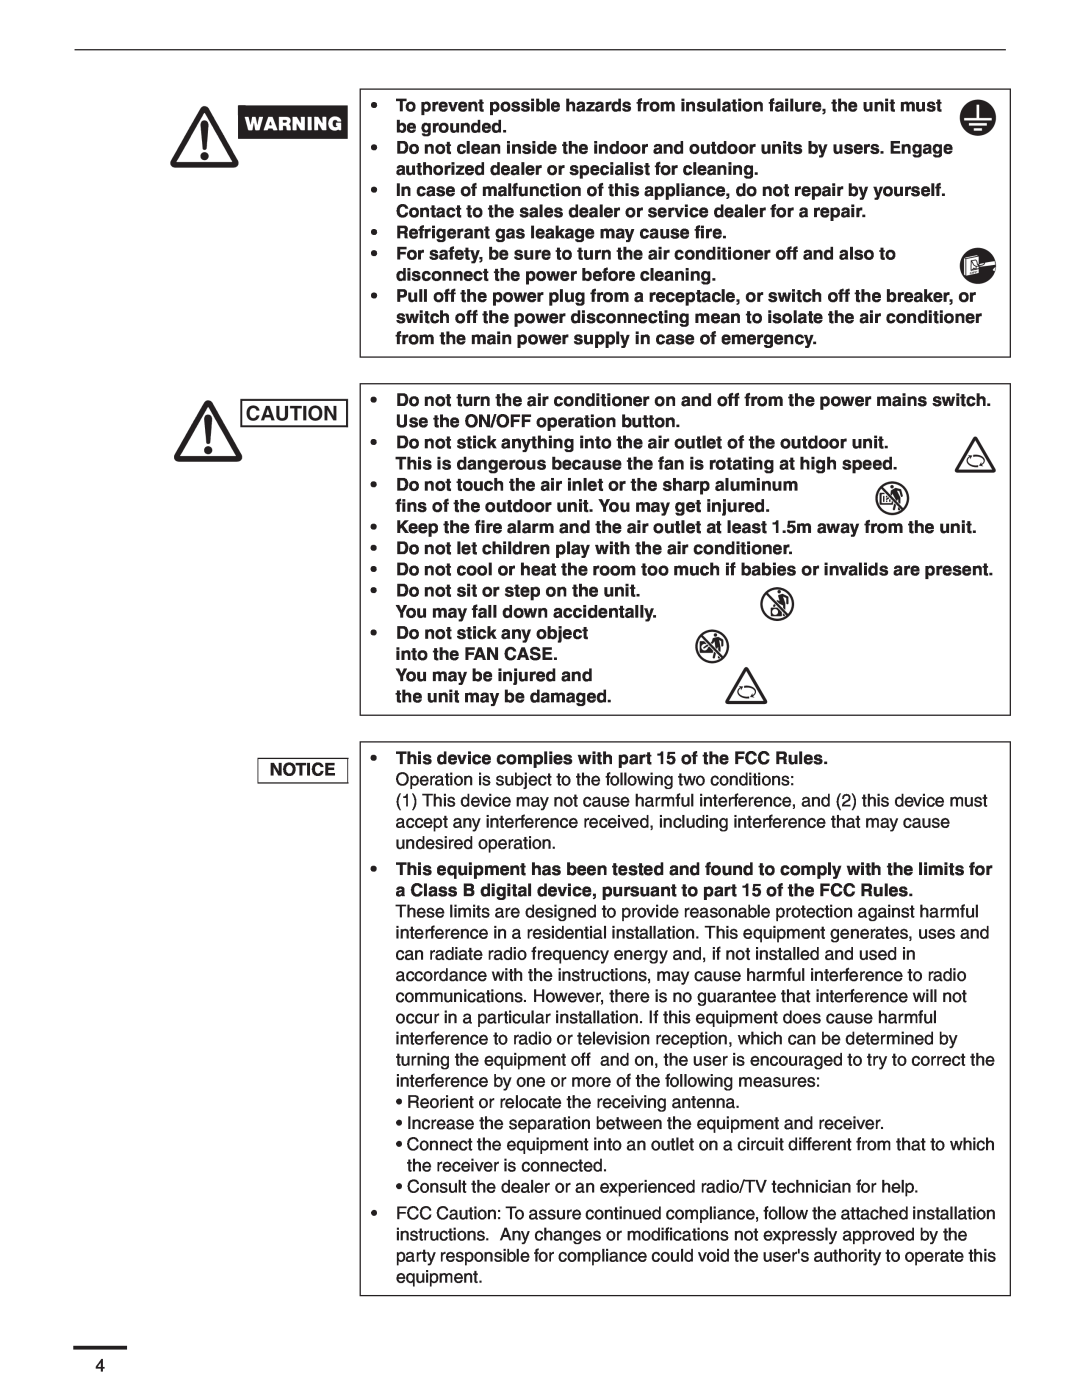 Panasonic CS-MKS24NKU, CS-MKS9NKU, CS-MKS18NKU service manual Refrigerant gas leakage may cause fire 